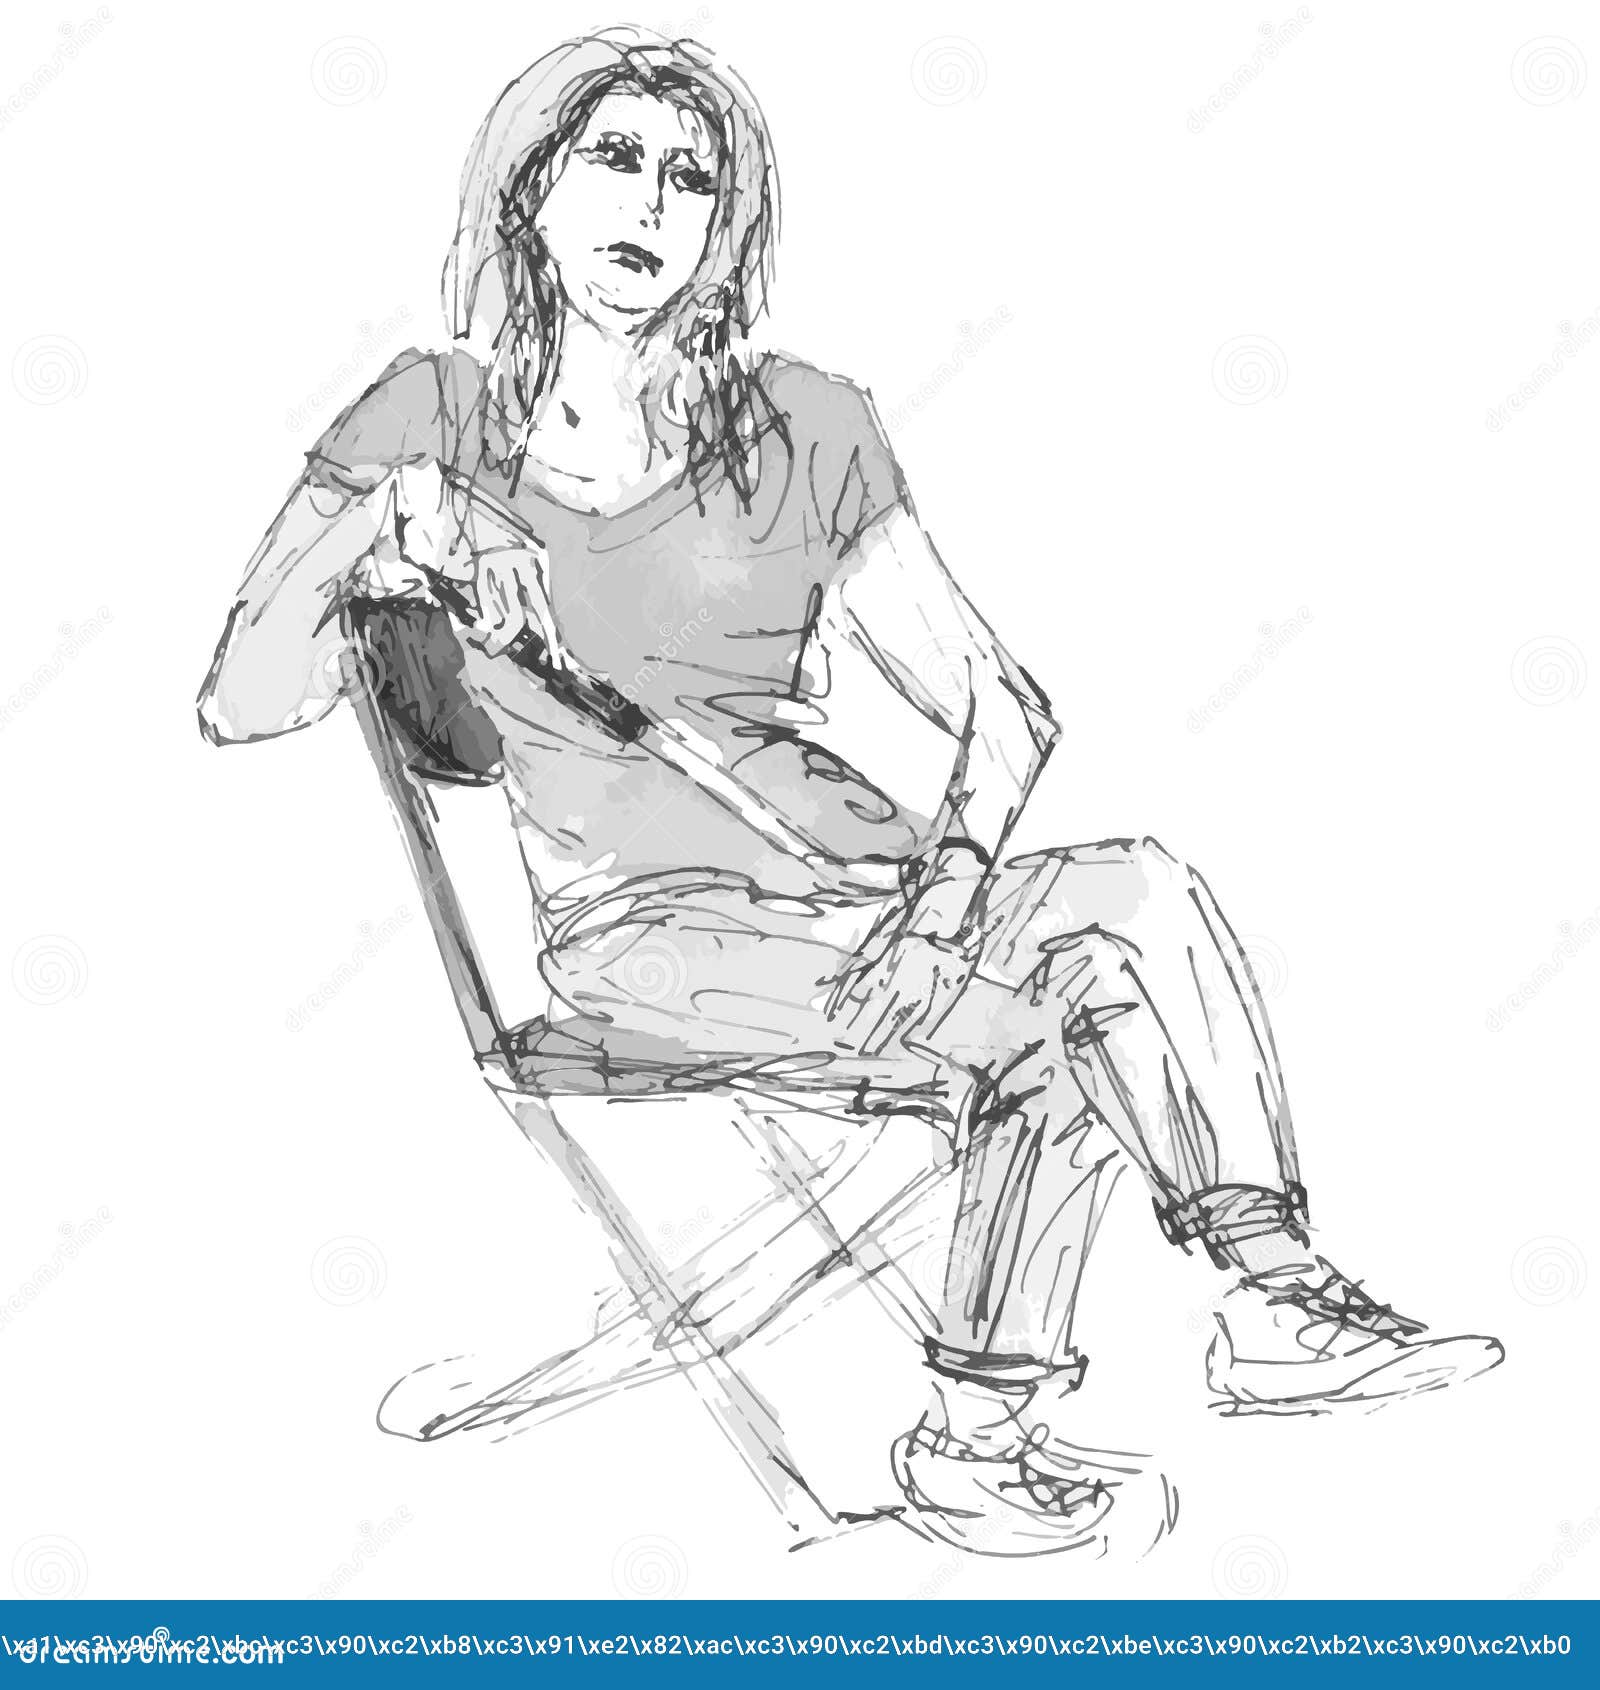 https://thumbs.dreamstime.com/z/woman-sitting-chair-knife-her-hands-liner-watercolor-illustration-sketch-woman-sitting-chair-knife-168865264.jpg